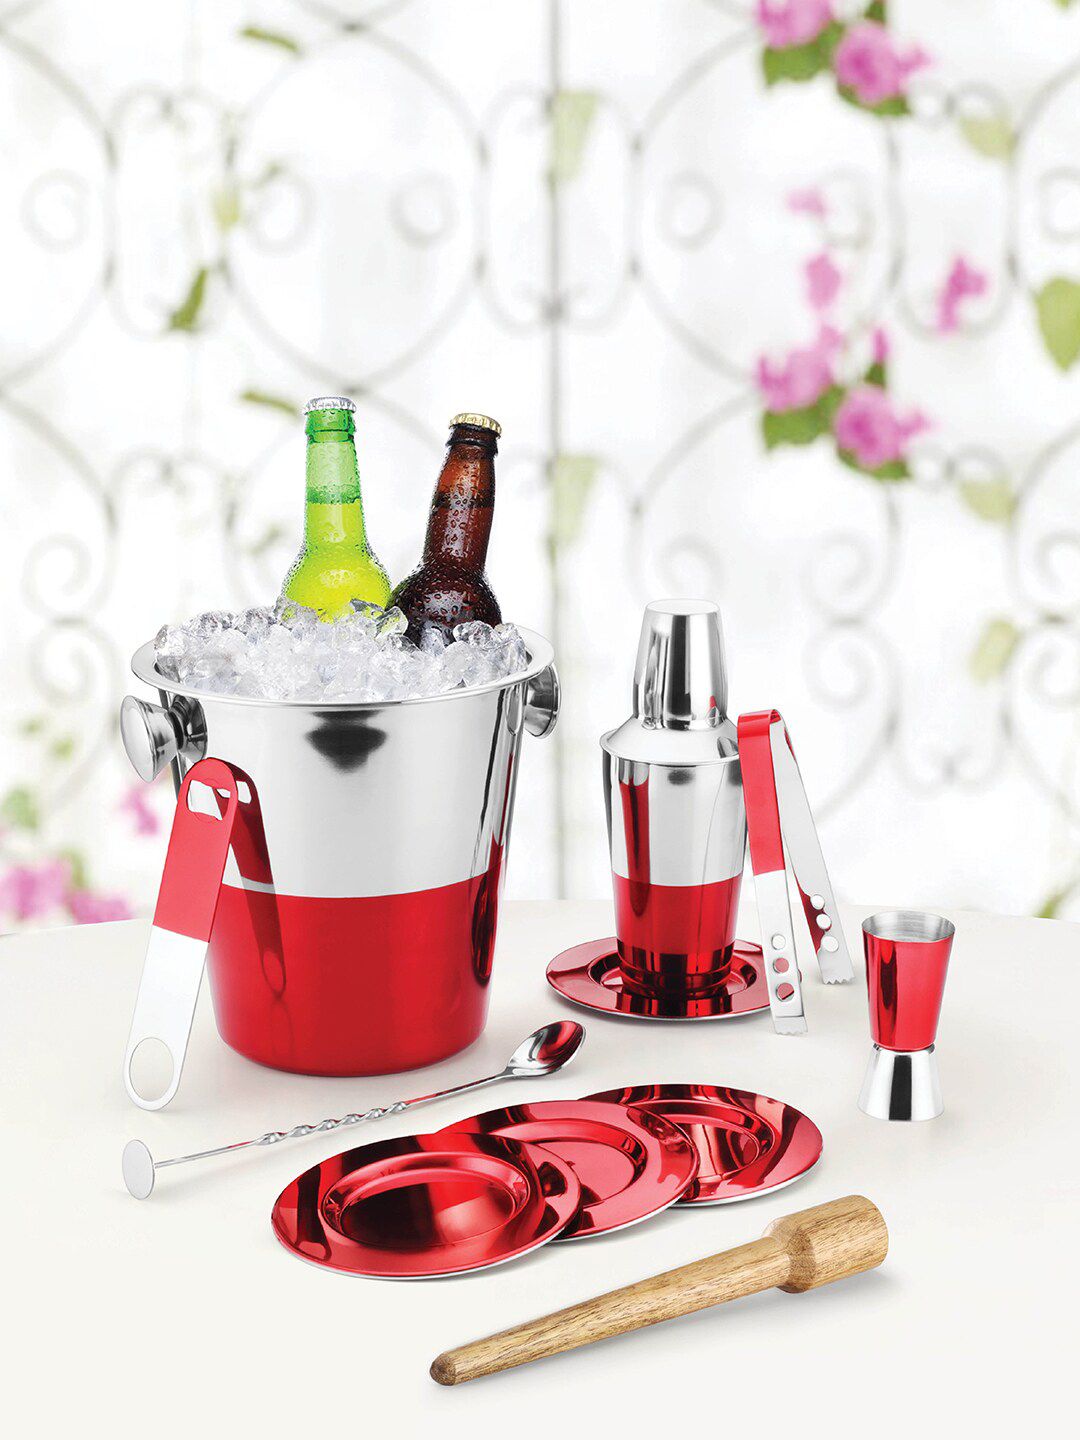 URBAN CHEF Bartender Red Lacquered Kit Stainless Steel 11 Pieces Bar Set Price in India